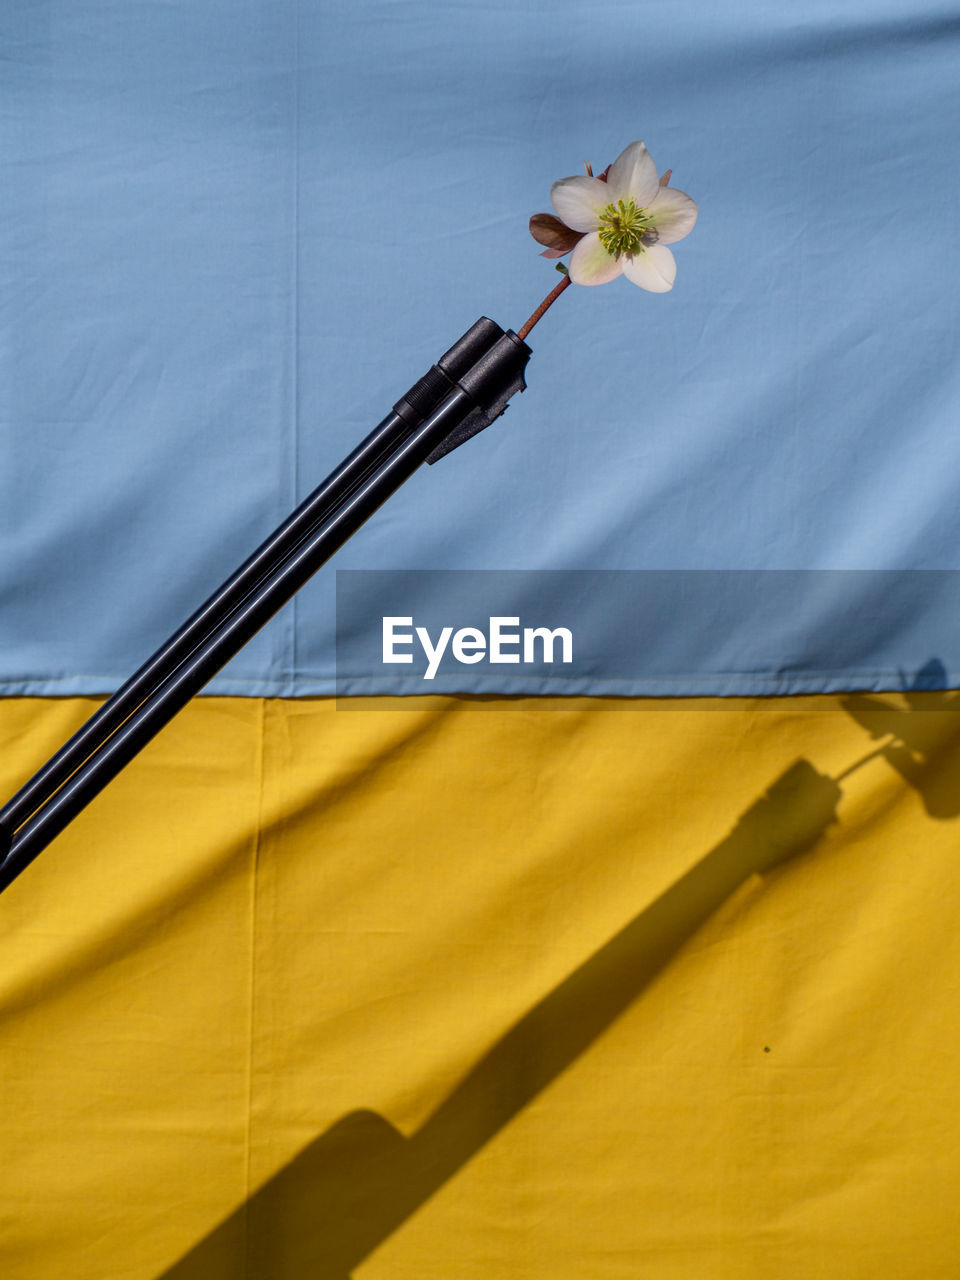 Ukrainian flag with shotgun with a white flower on the top - peace concept